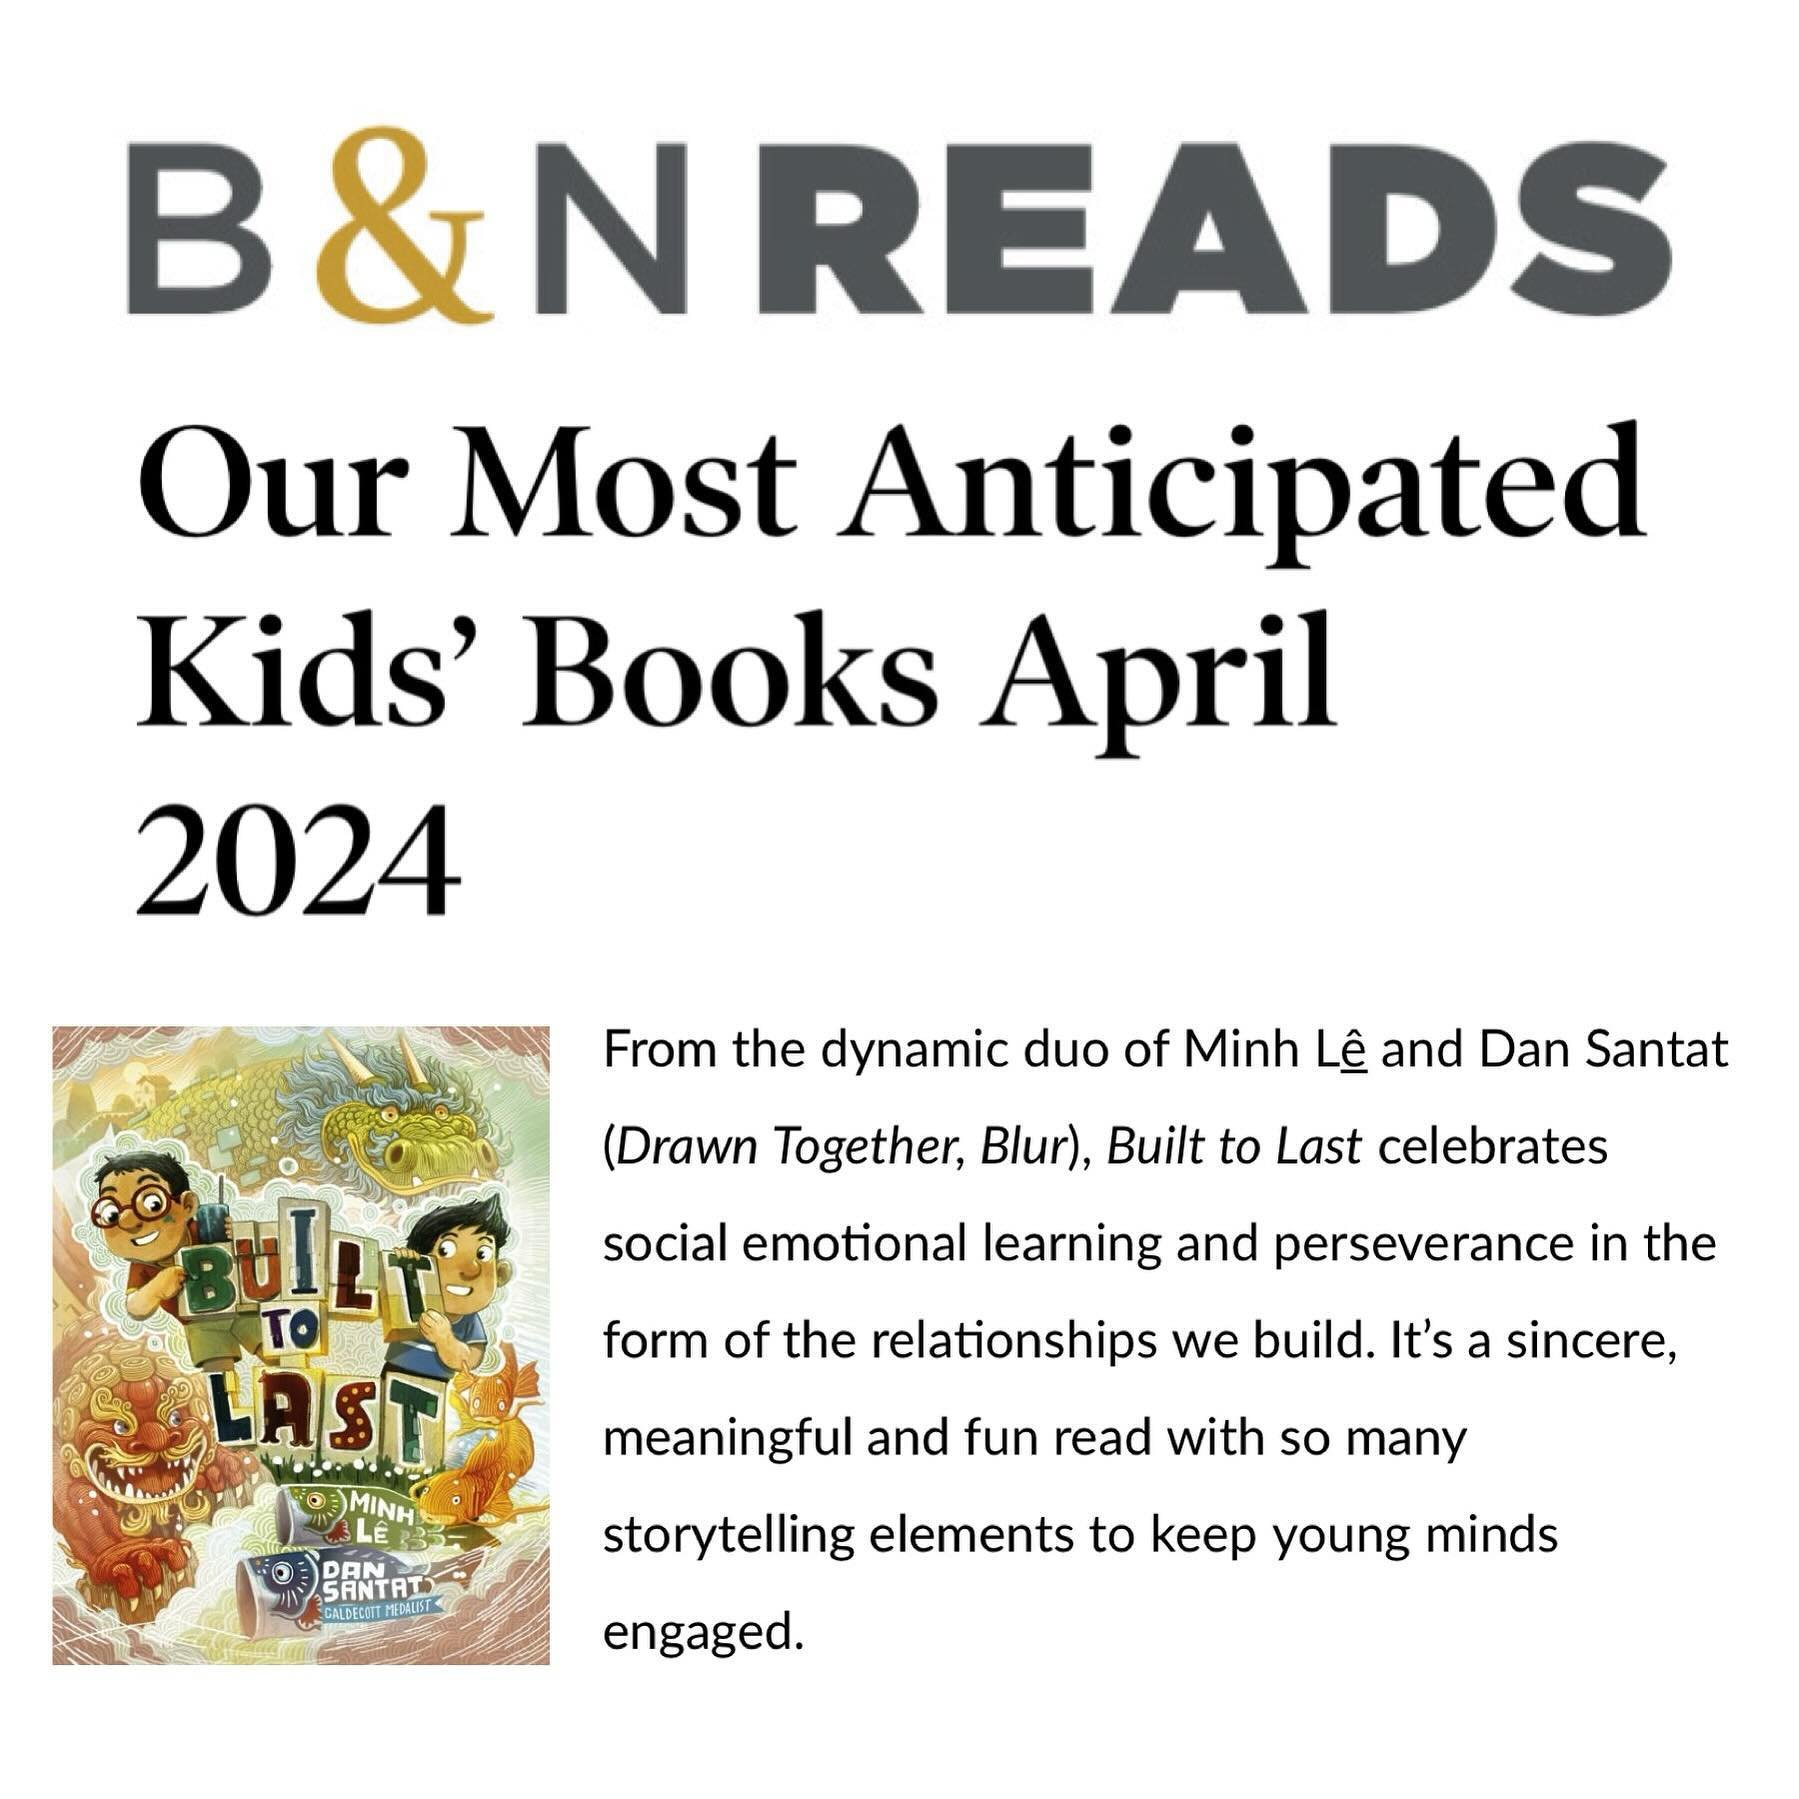 Psyched to see BUILT TO LAST by me &amp; @dsantat on @barnesandnoble&rsquo;s Most Anticipated Kids&rsquo; Books April list 🥰 (Coming out this month: April 30 from @knopfkids @randomhousekids)

https://www.barnesandnoble.com/blog/our-most-anticipated